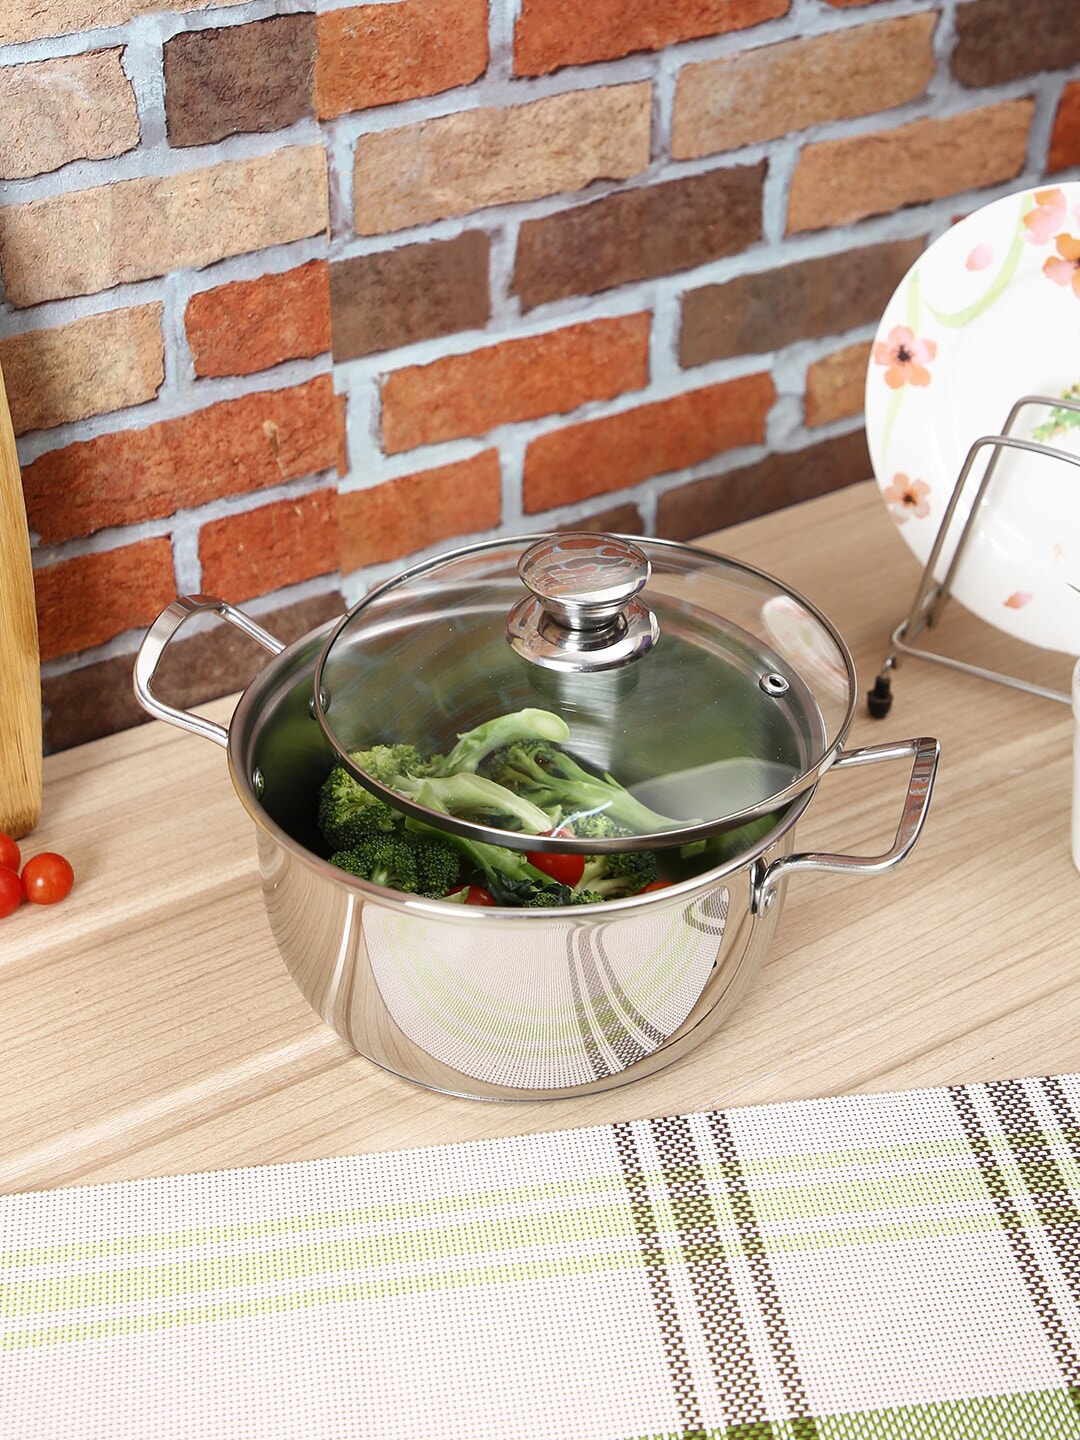 AURUM Silver-Toned Stainless Steel Stew Pot With Lid Price in India